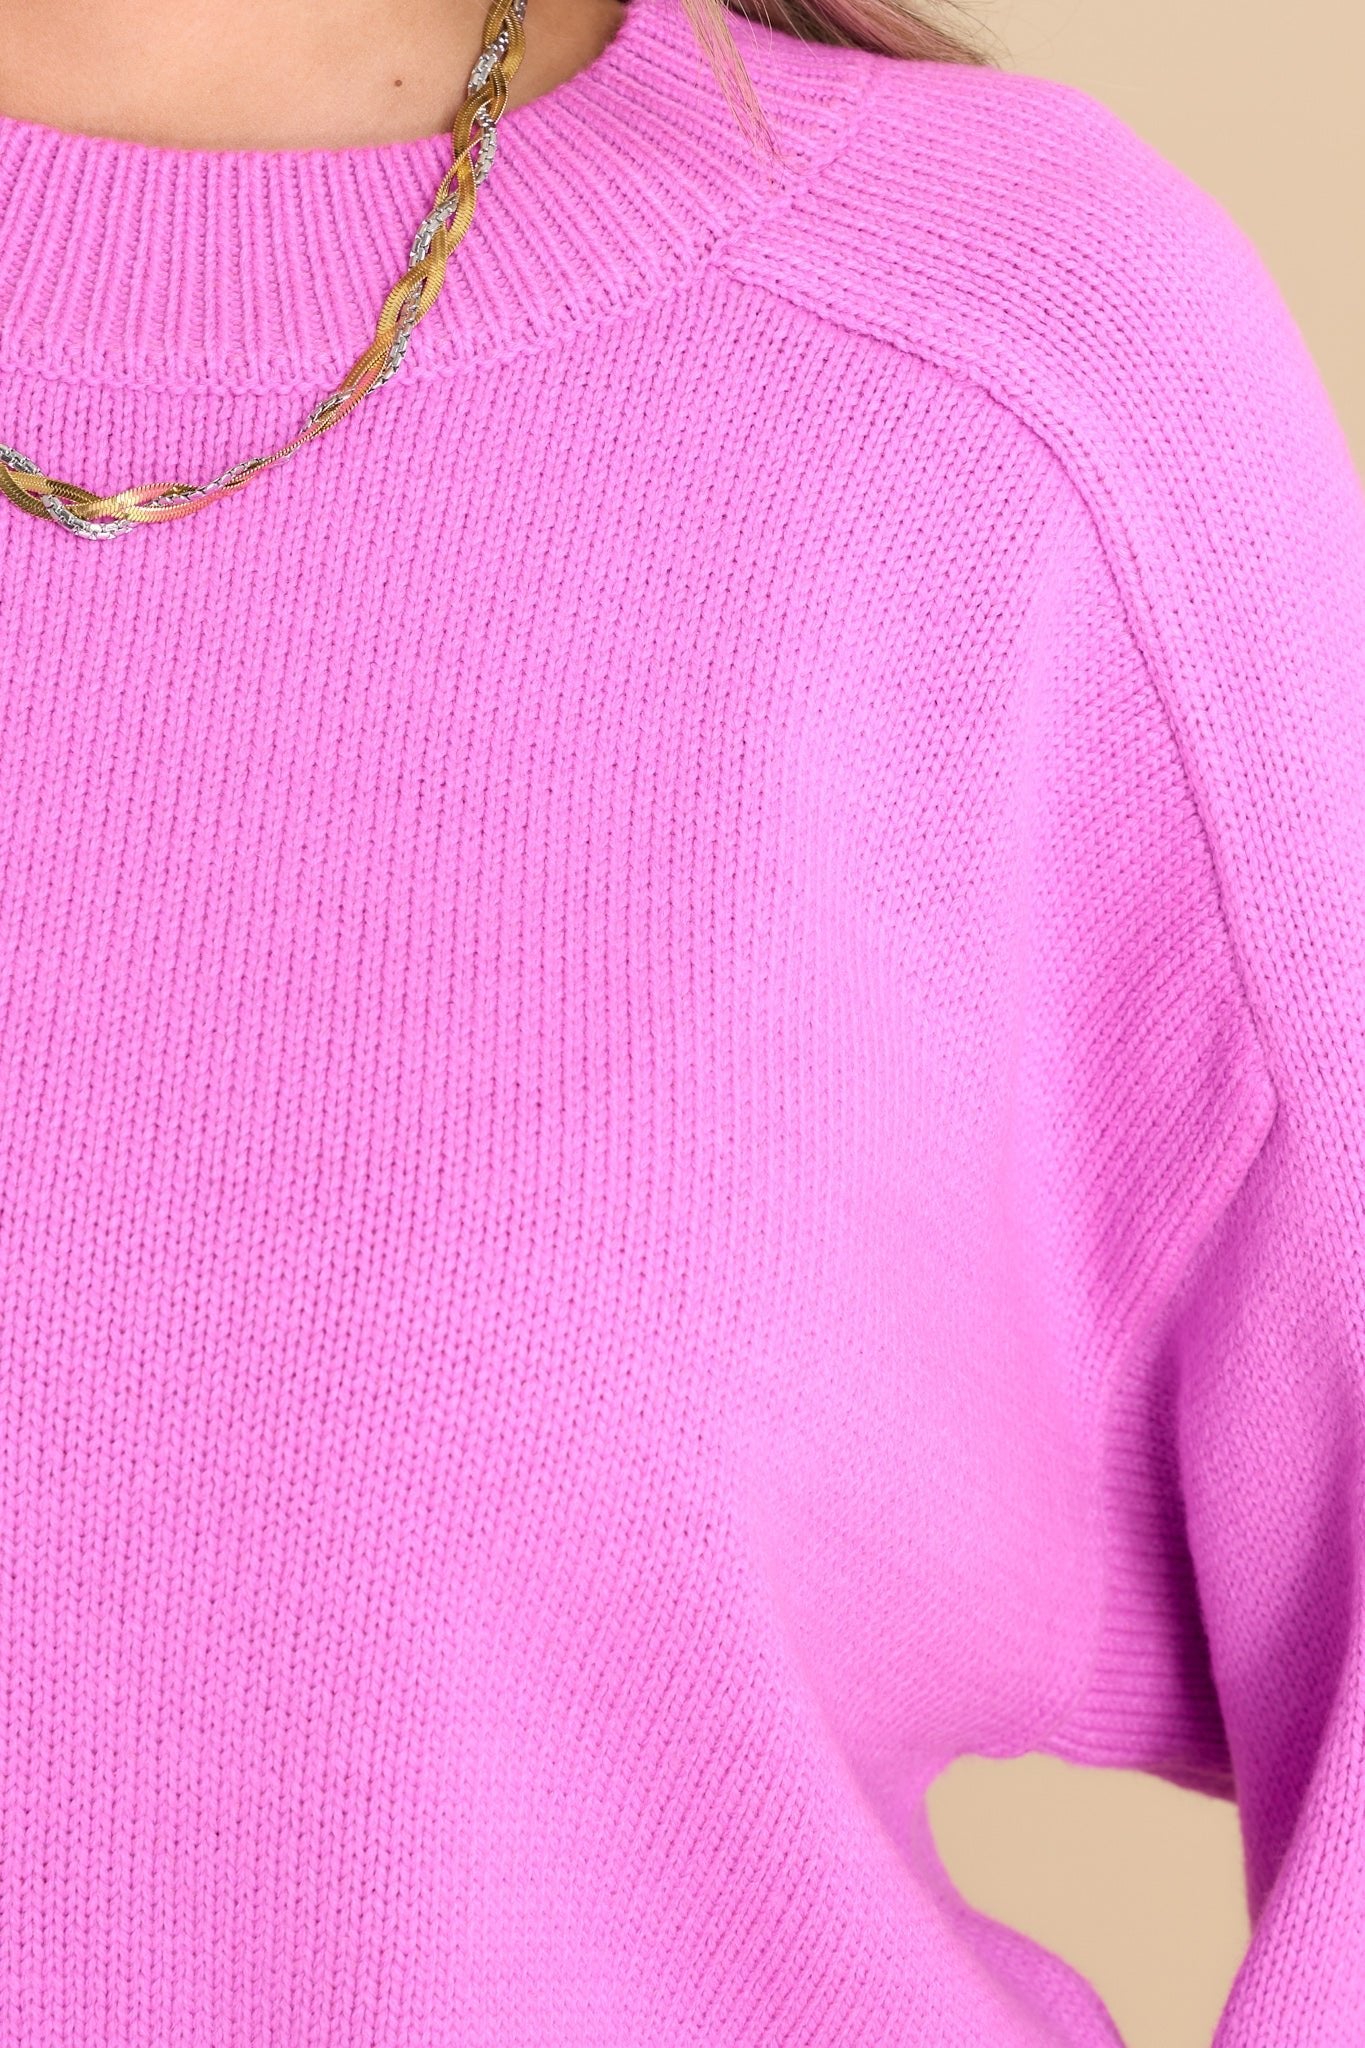 She Stands Out Fuchsia Sweater - Red Dress